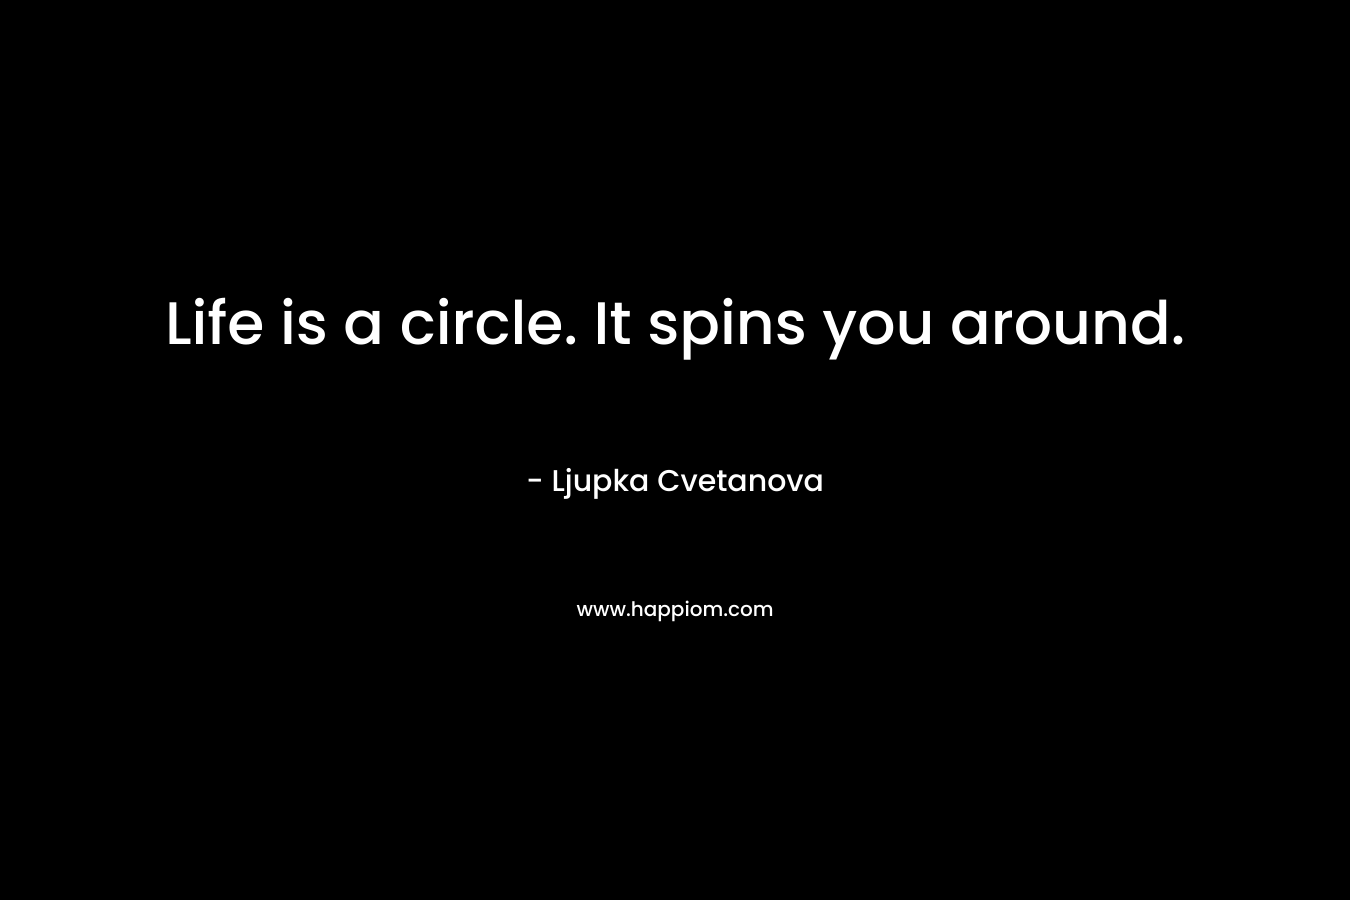 Life is a circle. It spins you around.